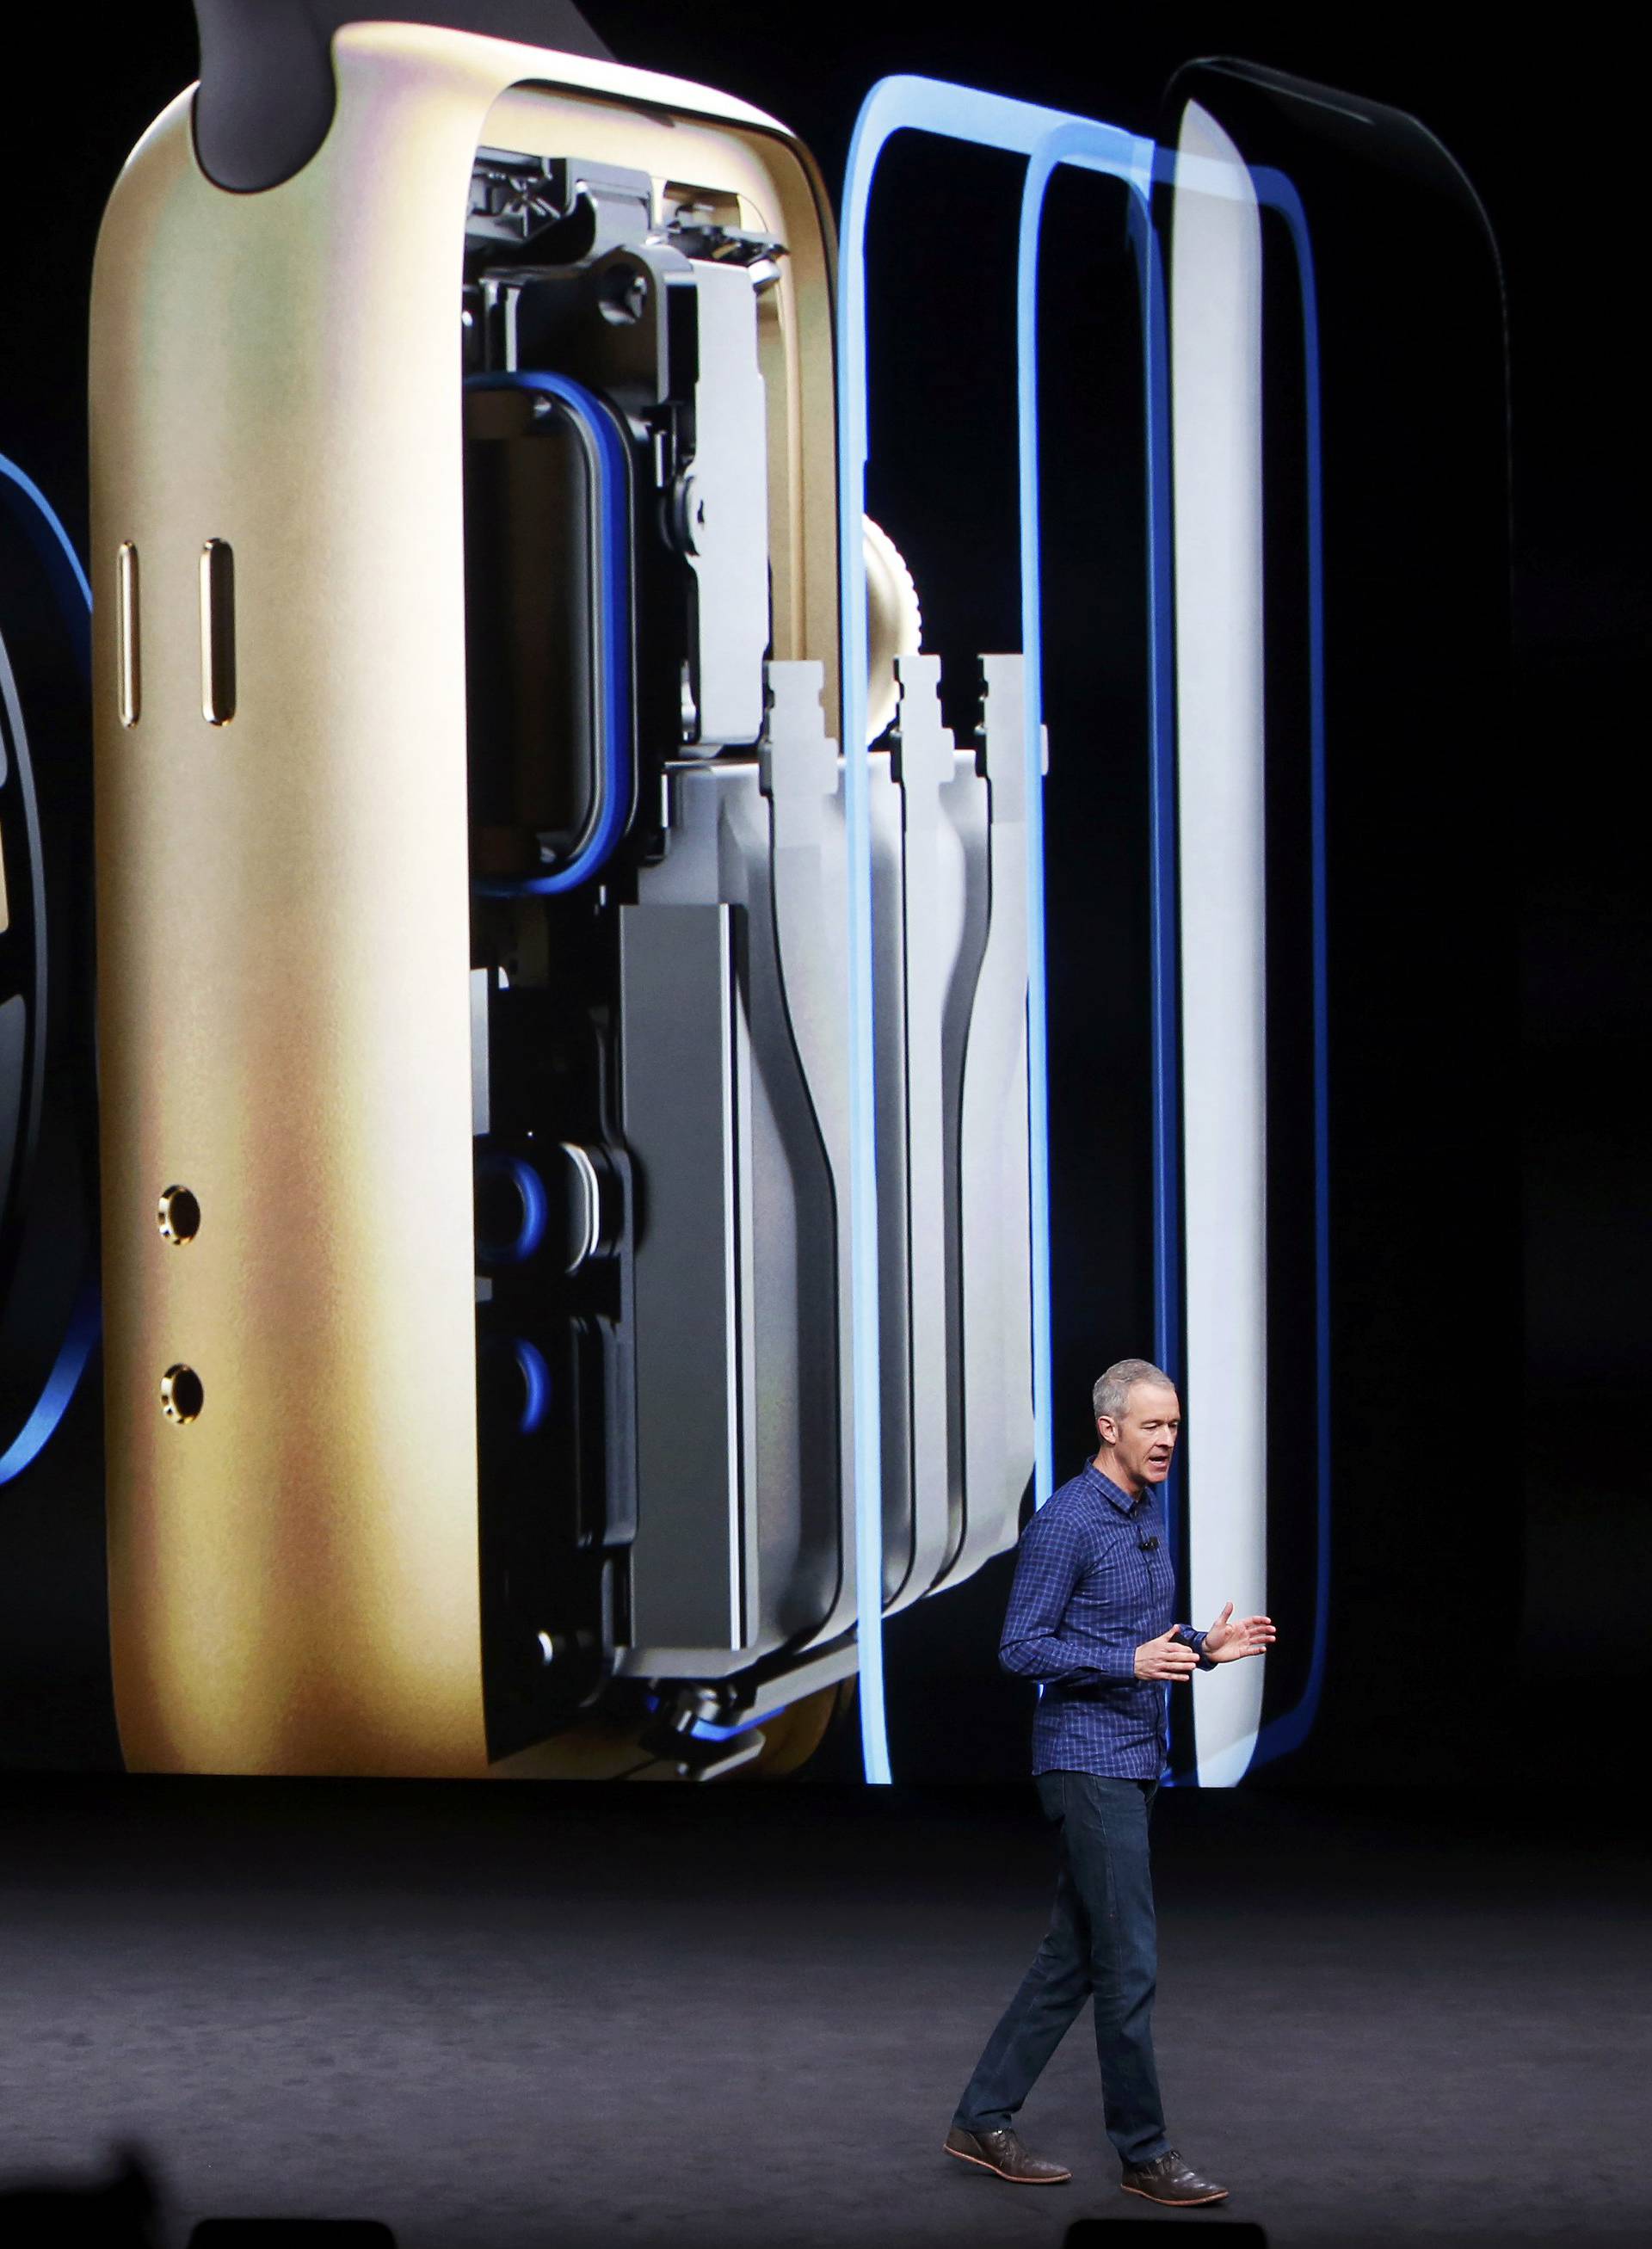 Jeff Williams discusses the Apple Watch Series 2 during a media event in San Francisco